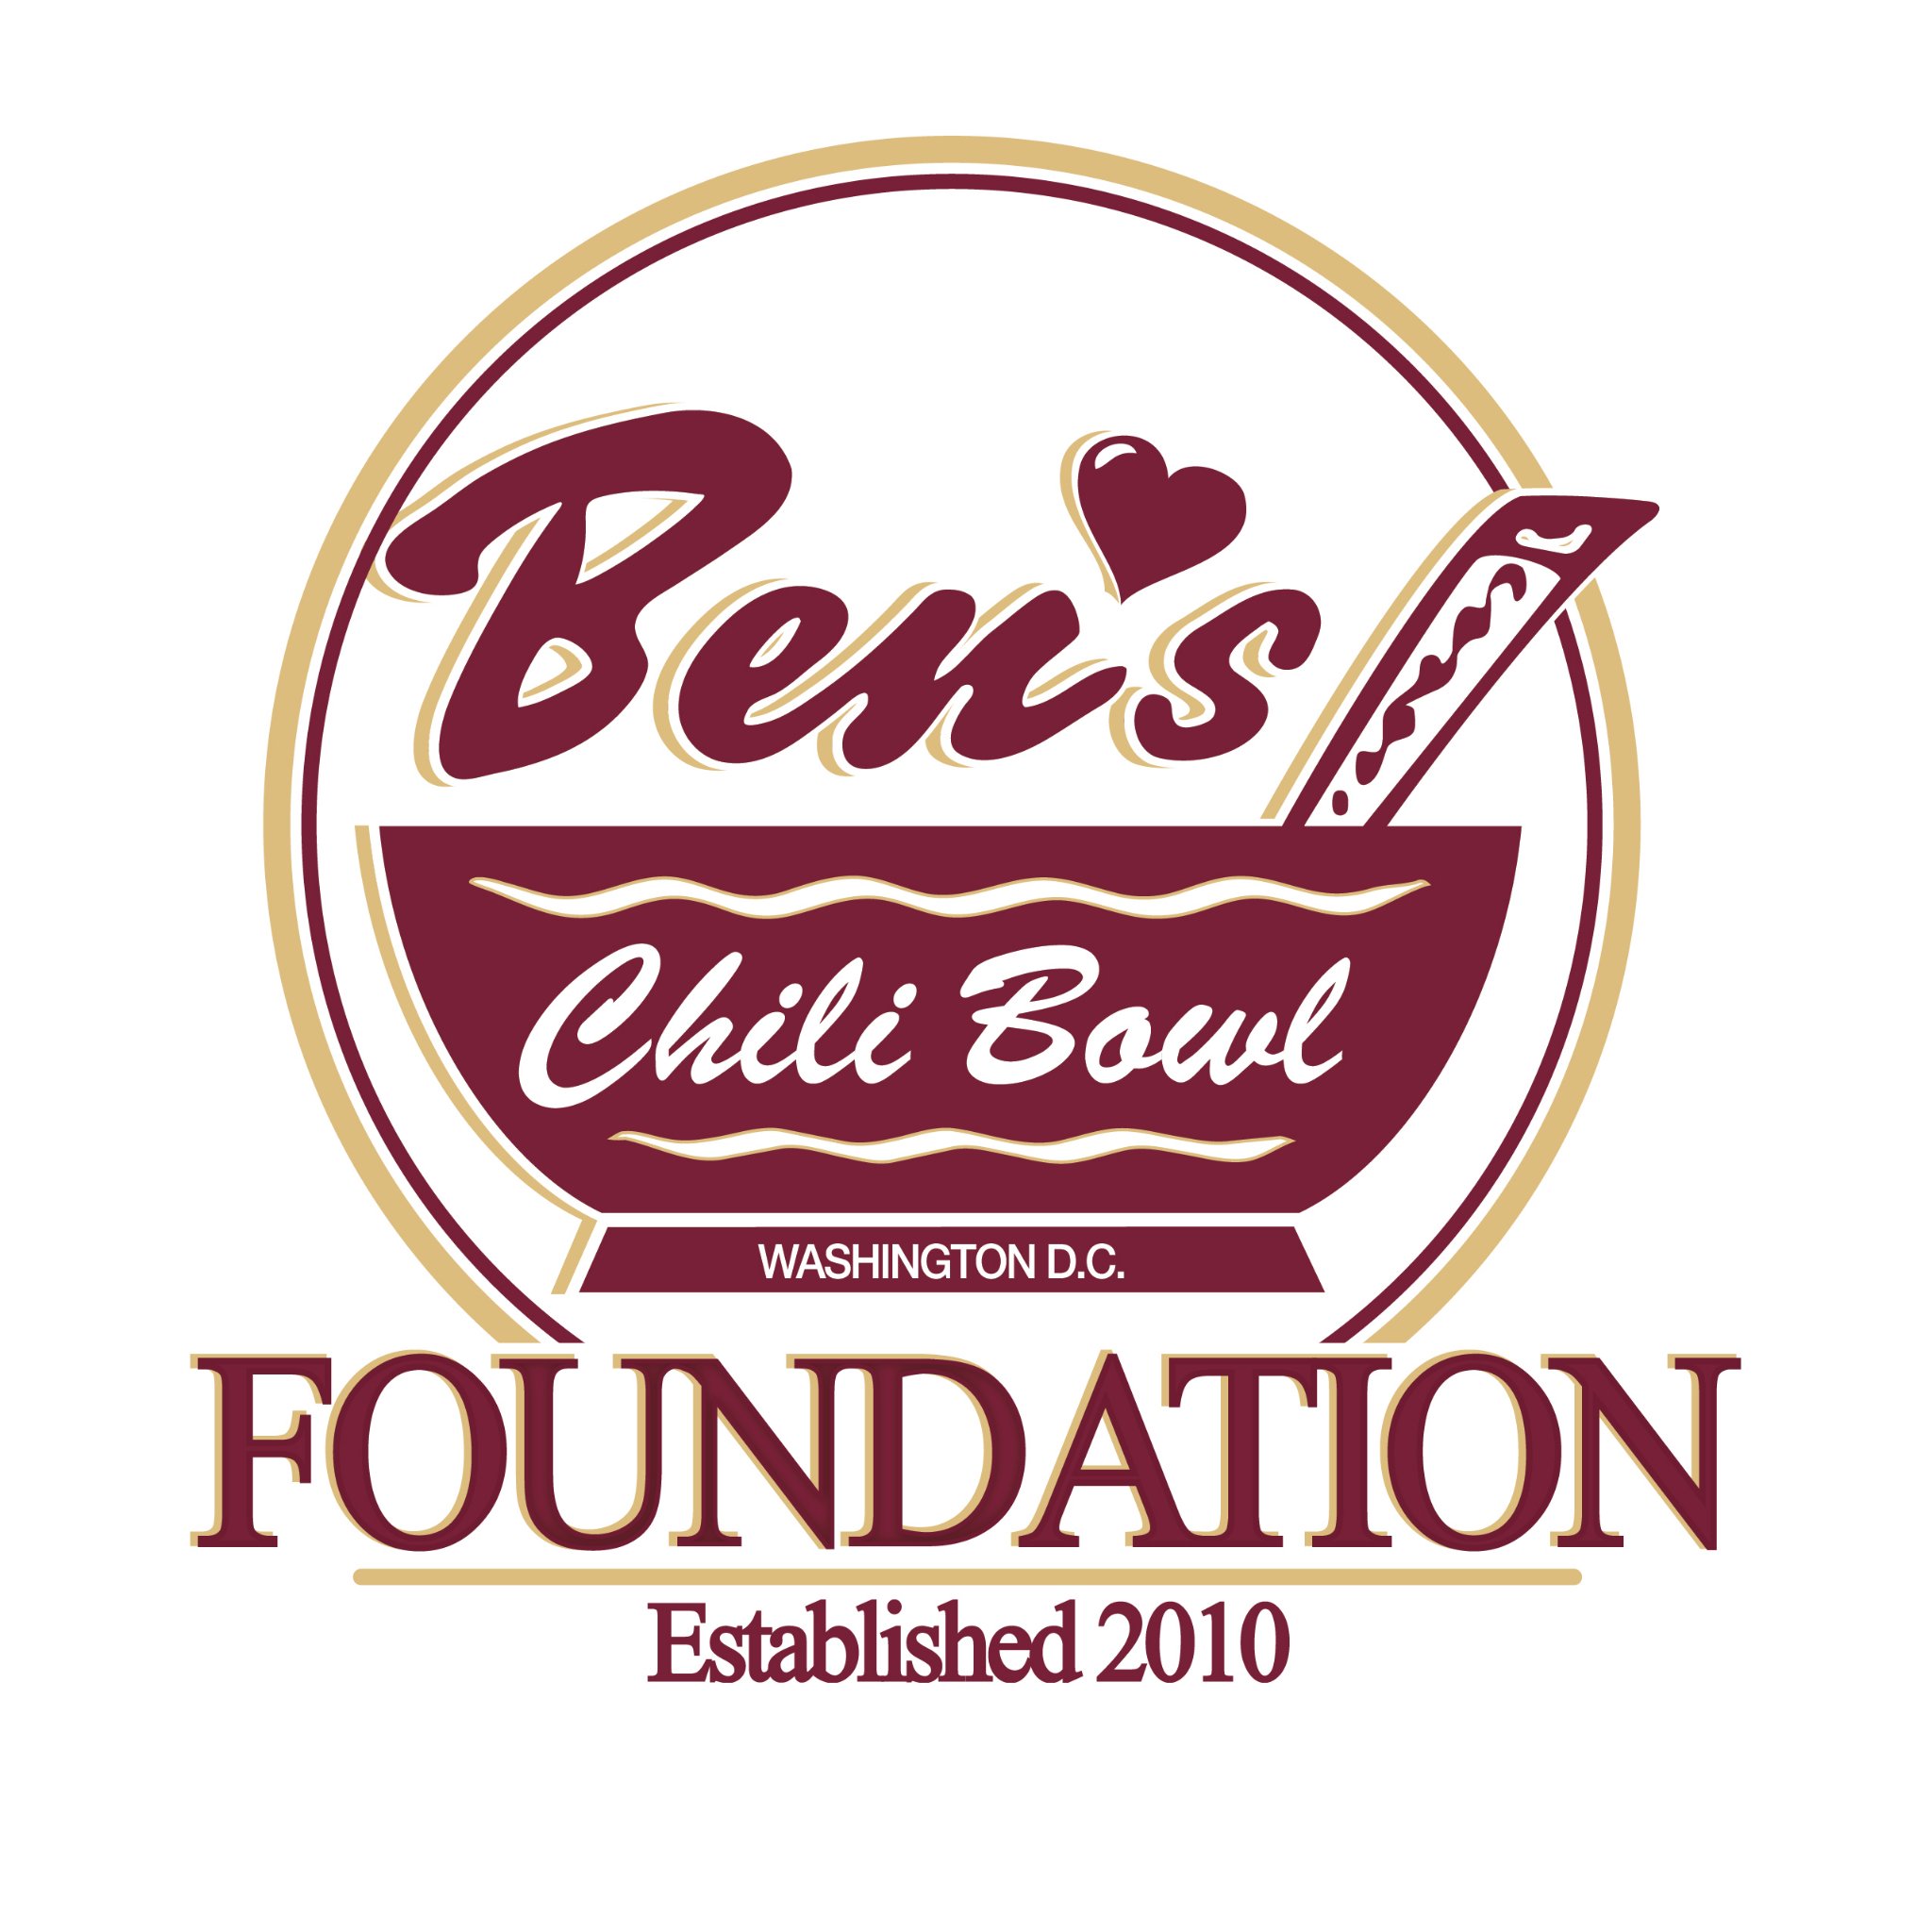 The Ben’s Chili Bowl Foundation was founded to provide service to the community and the neighborhoods in which we live.